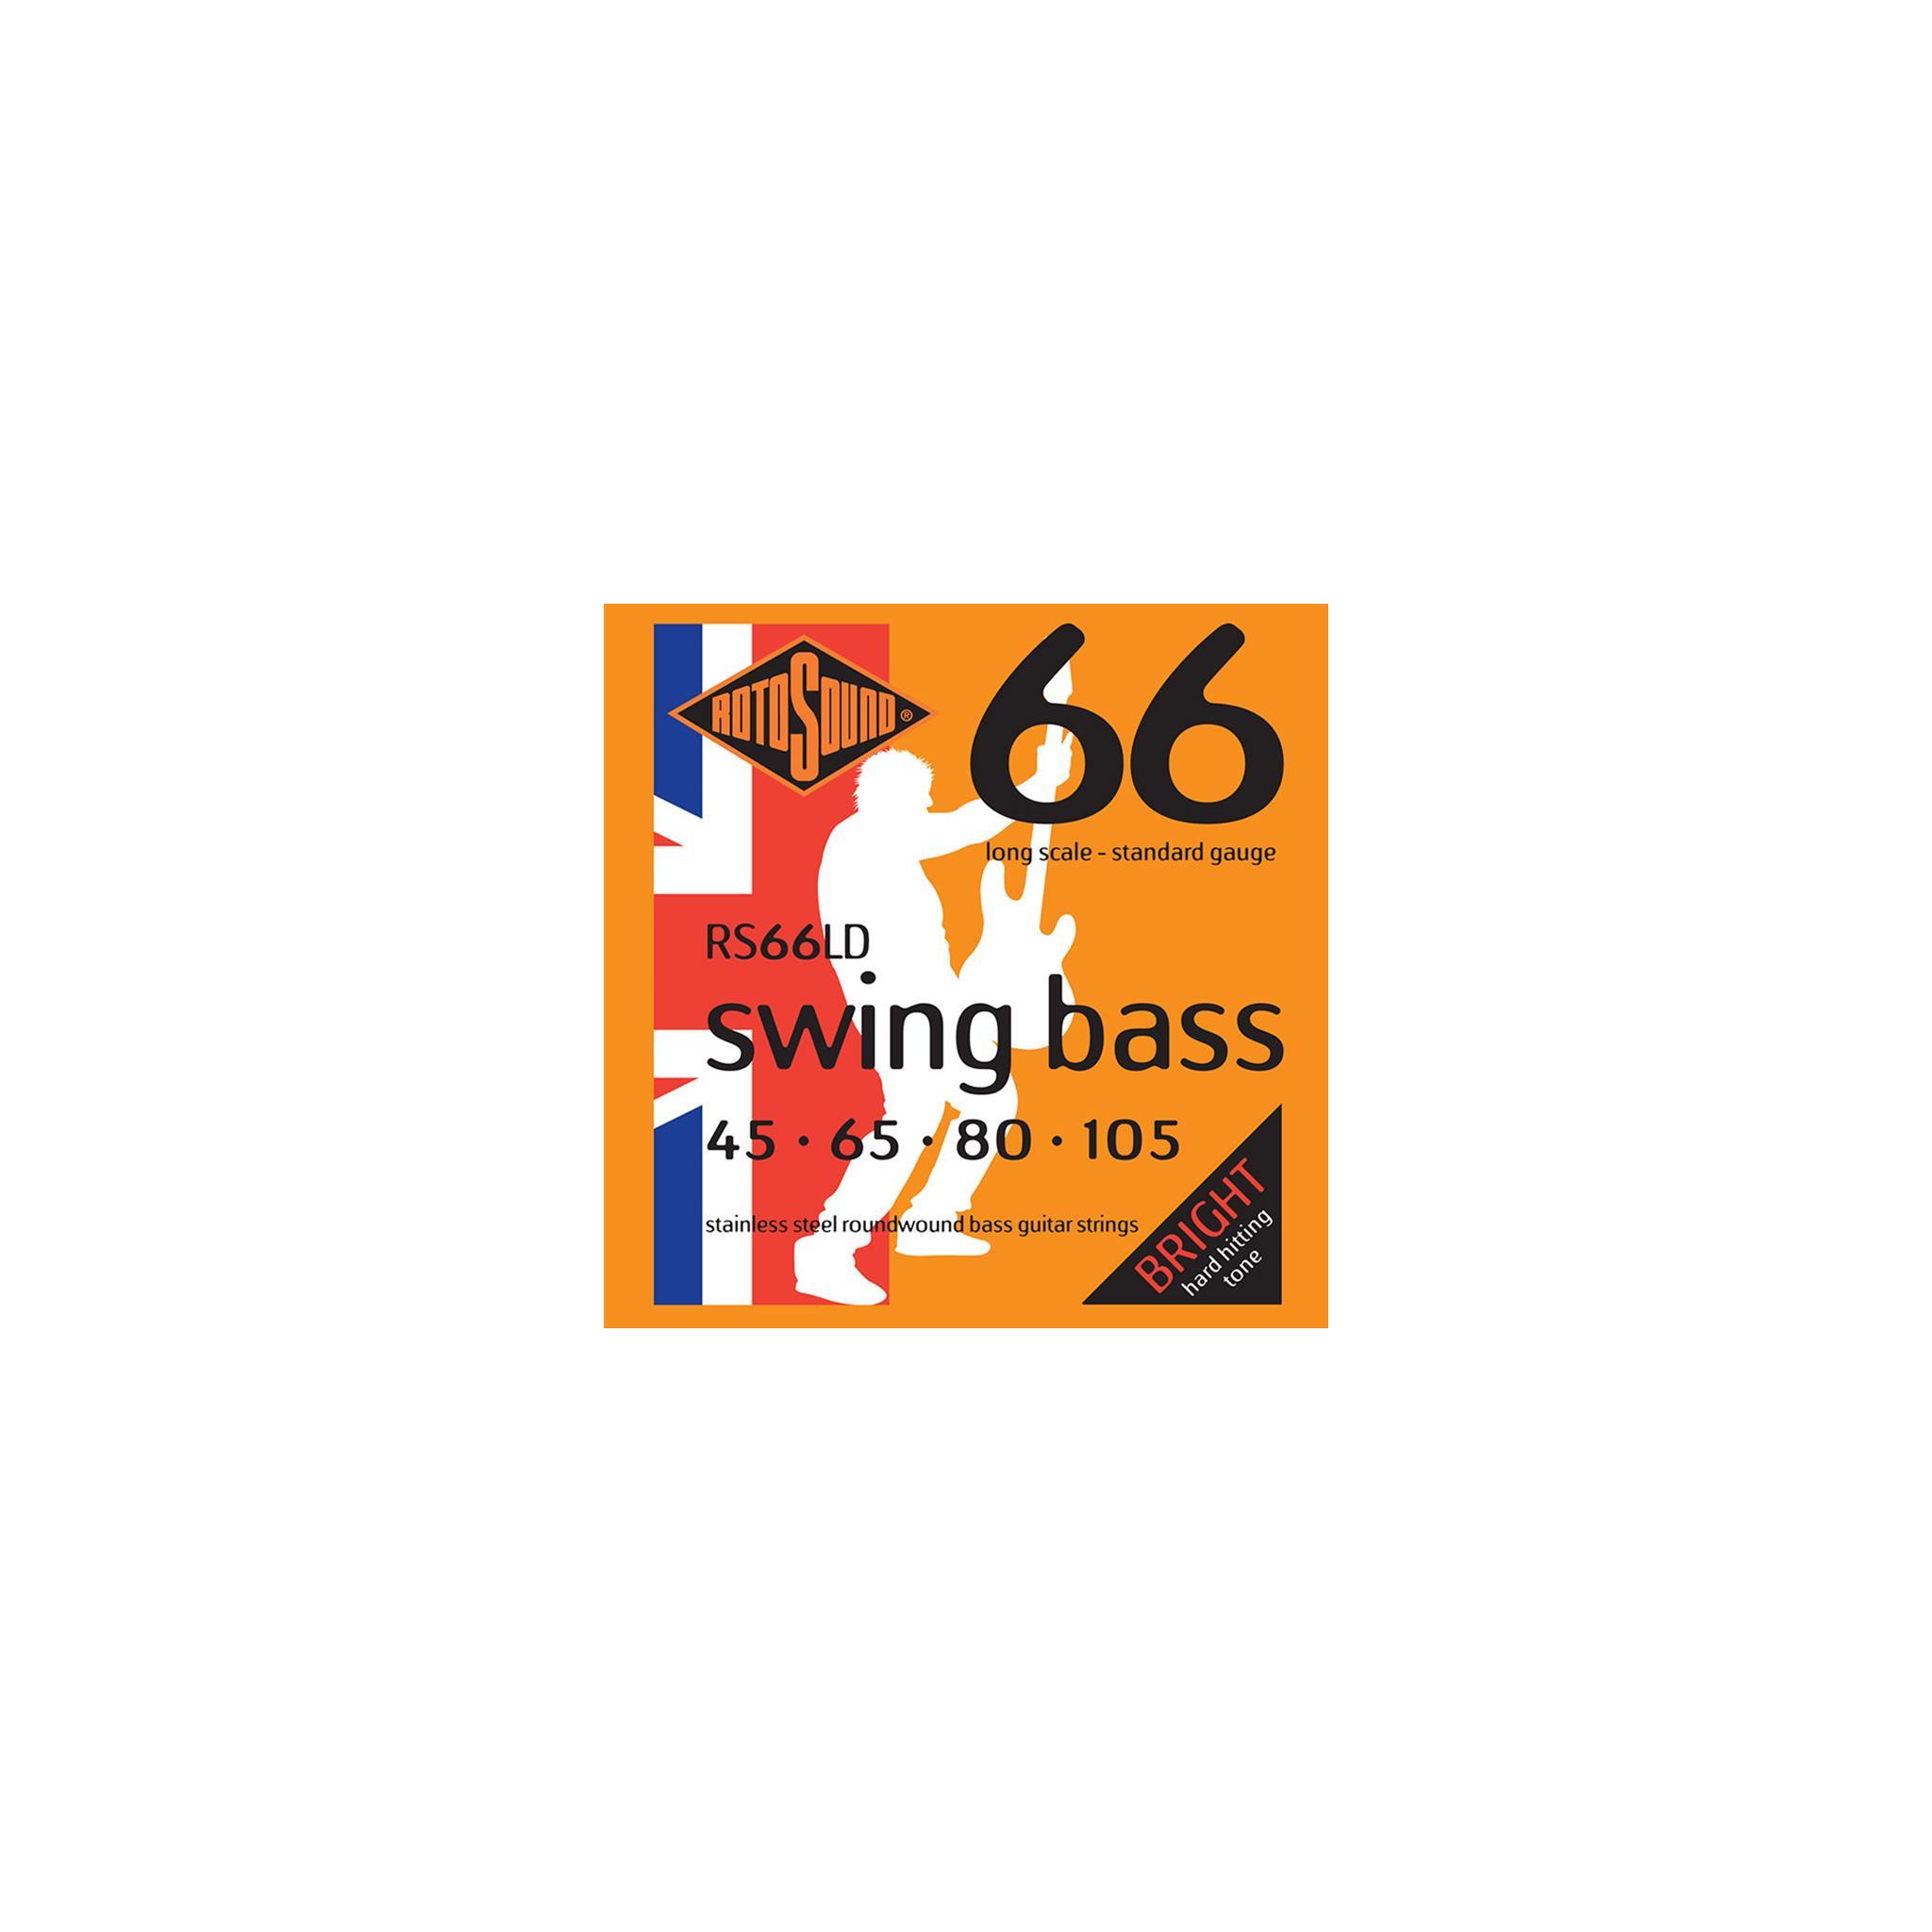 Rotosound Rs66Ld Swing Bass Guitar Strings